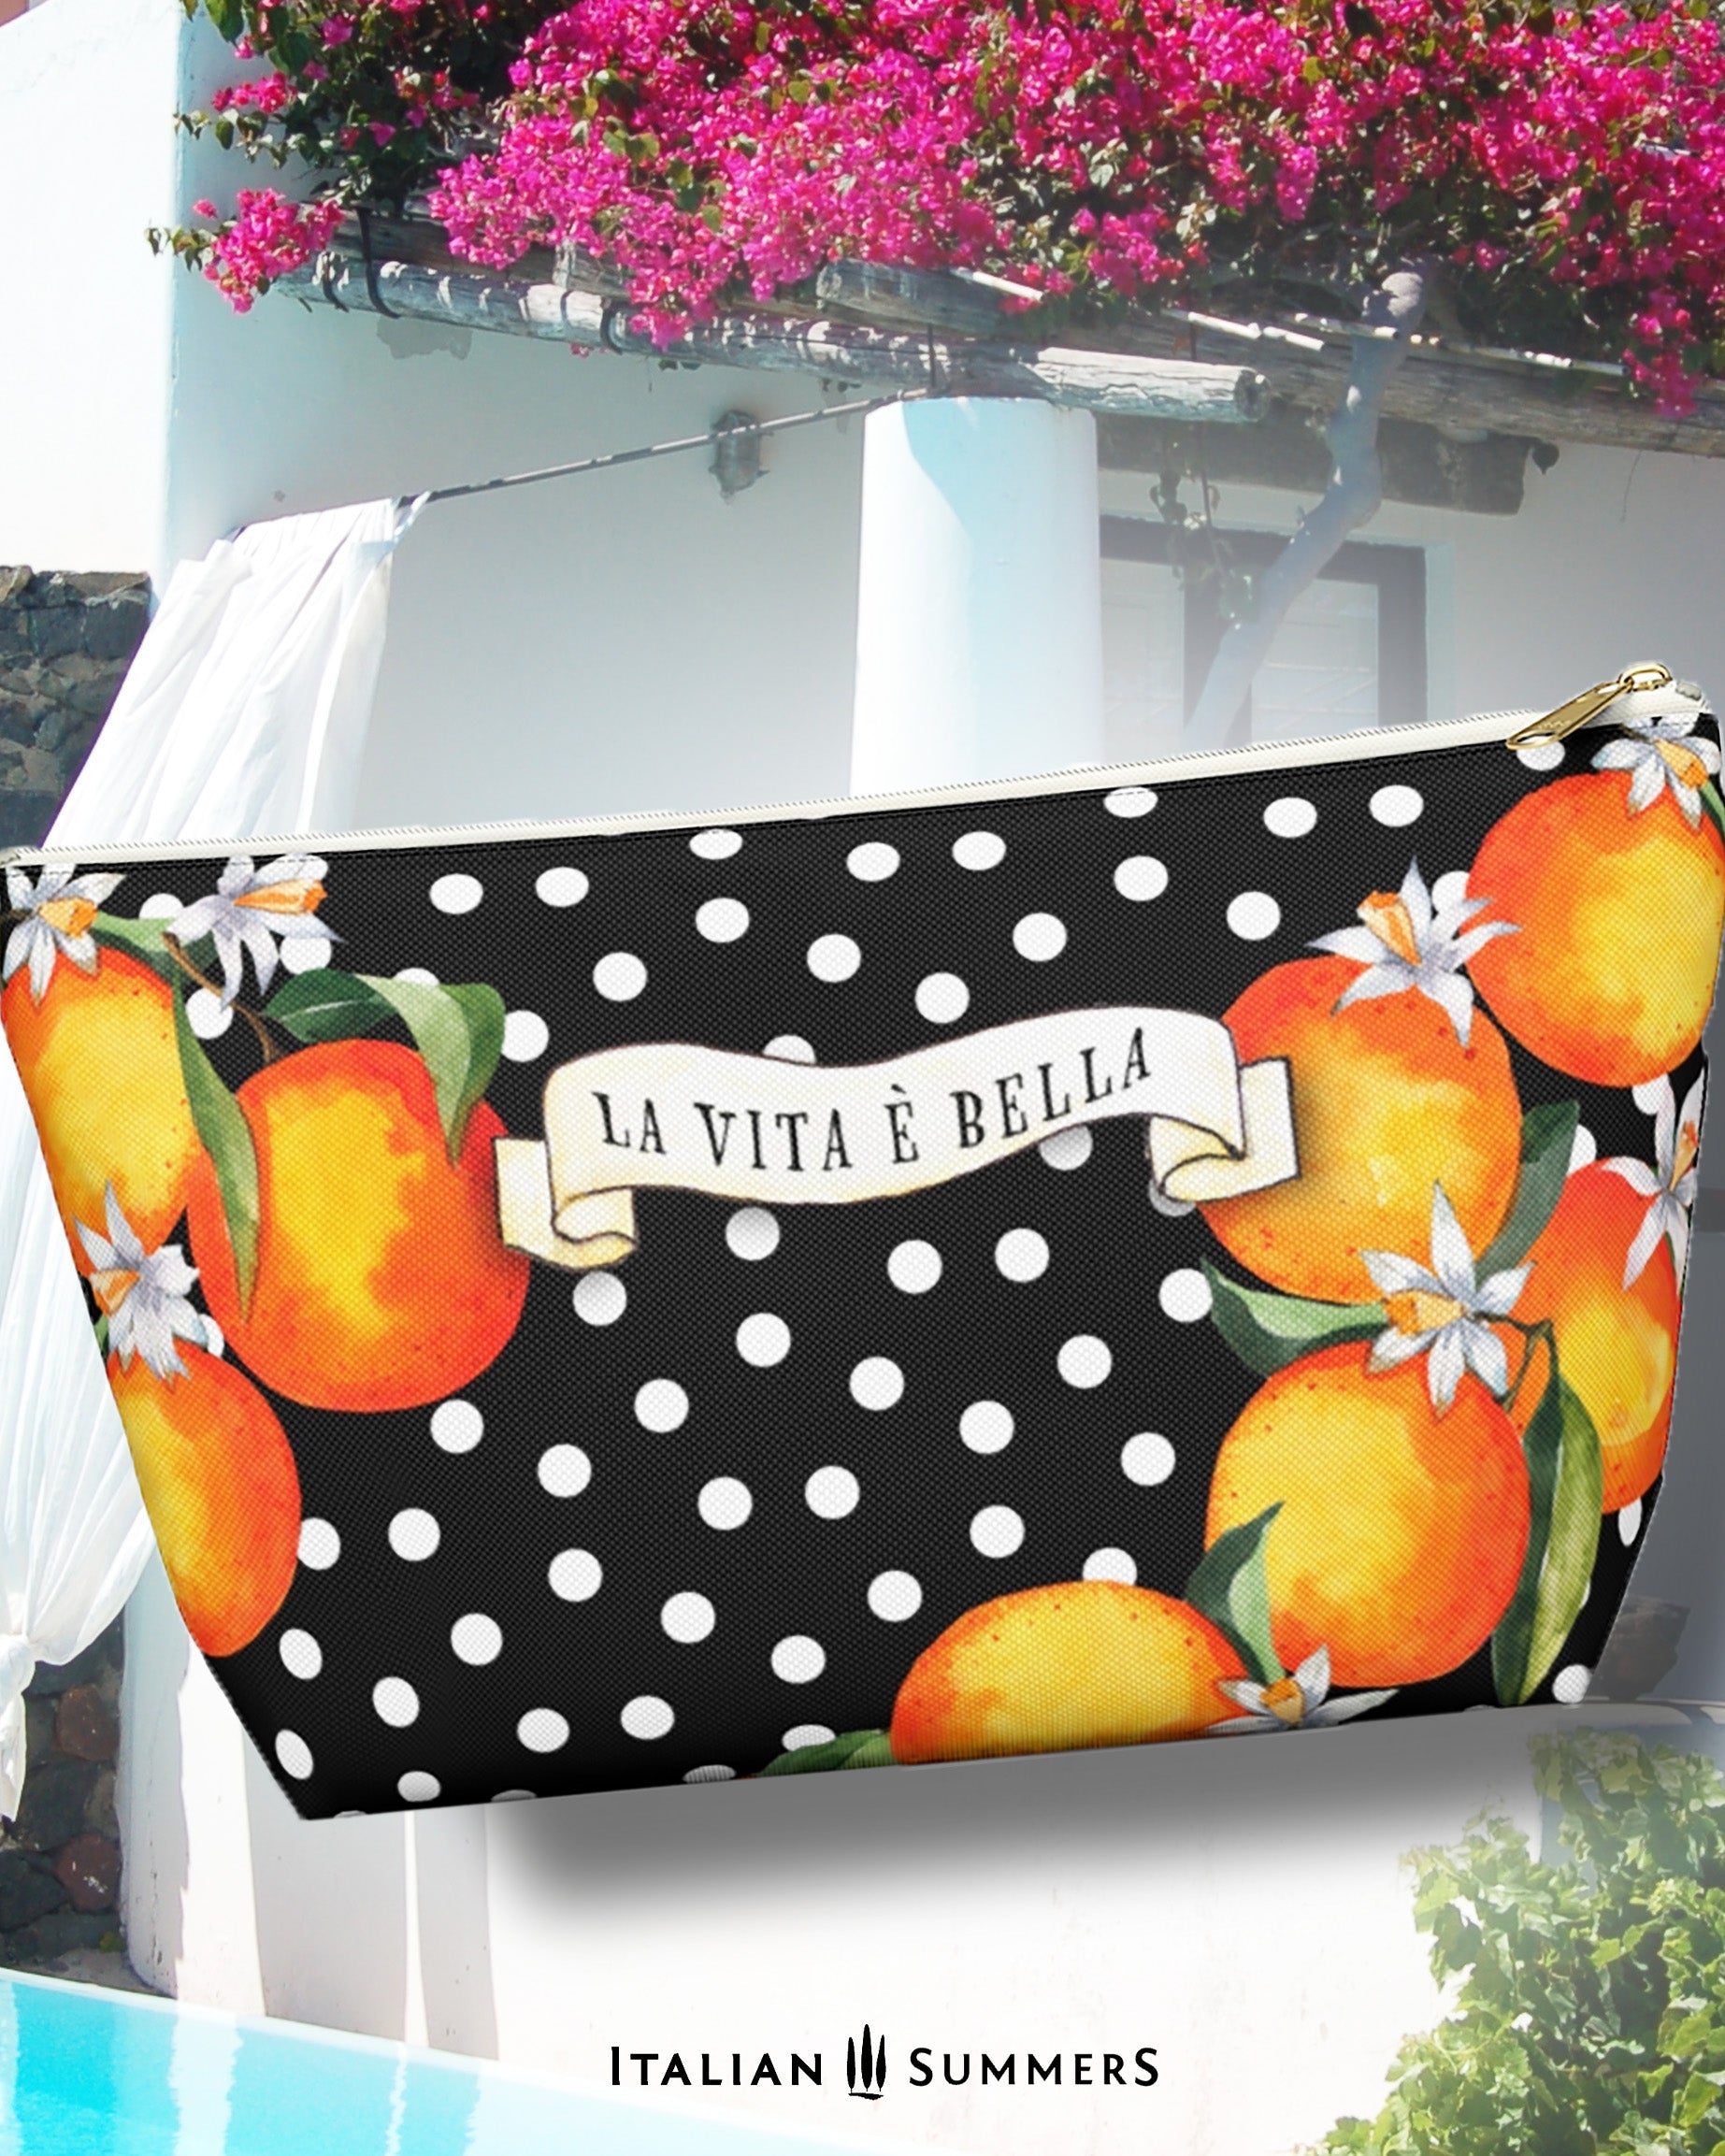 Italy inspired made to order clutch with zipper closure, printed and sewn together , decorated with Sicilian oranges and blooms on a black field with white polka dots. Made by Italian Summers 